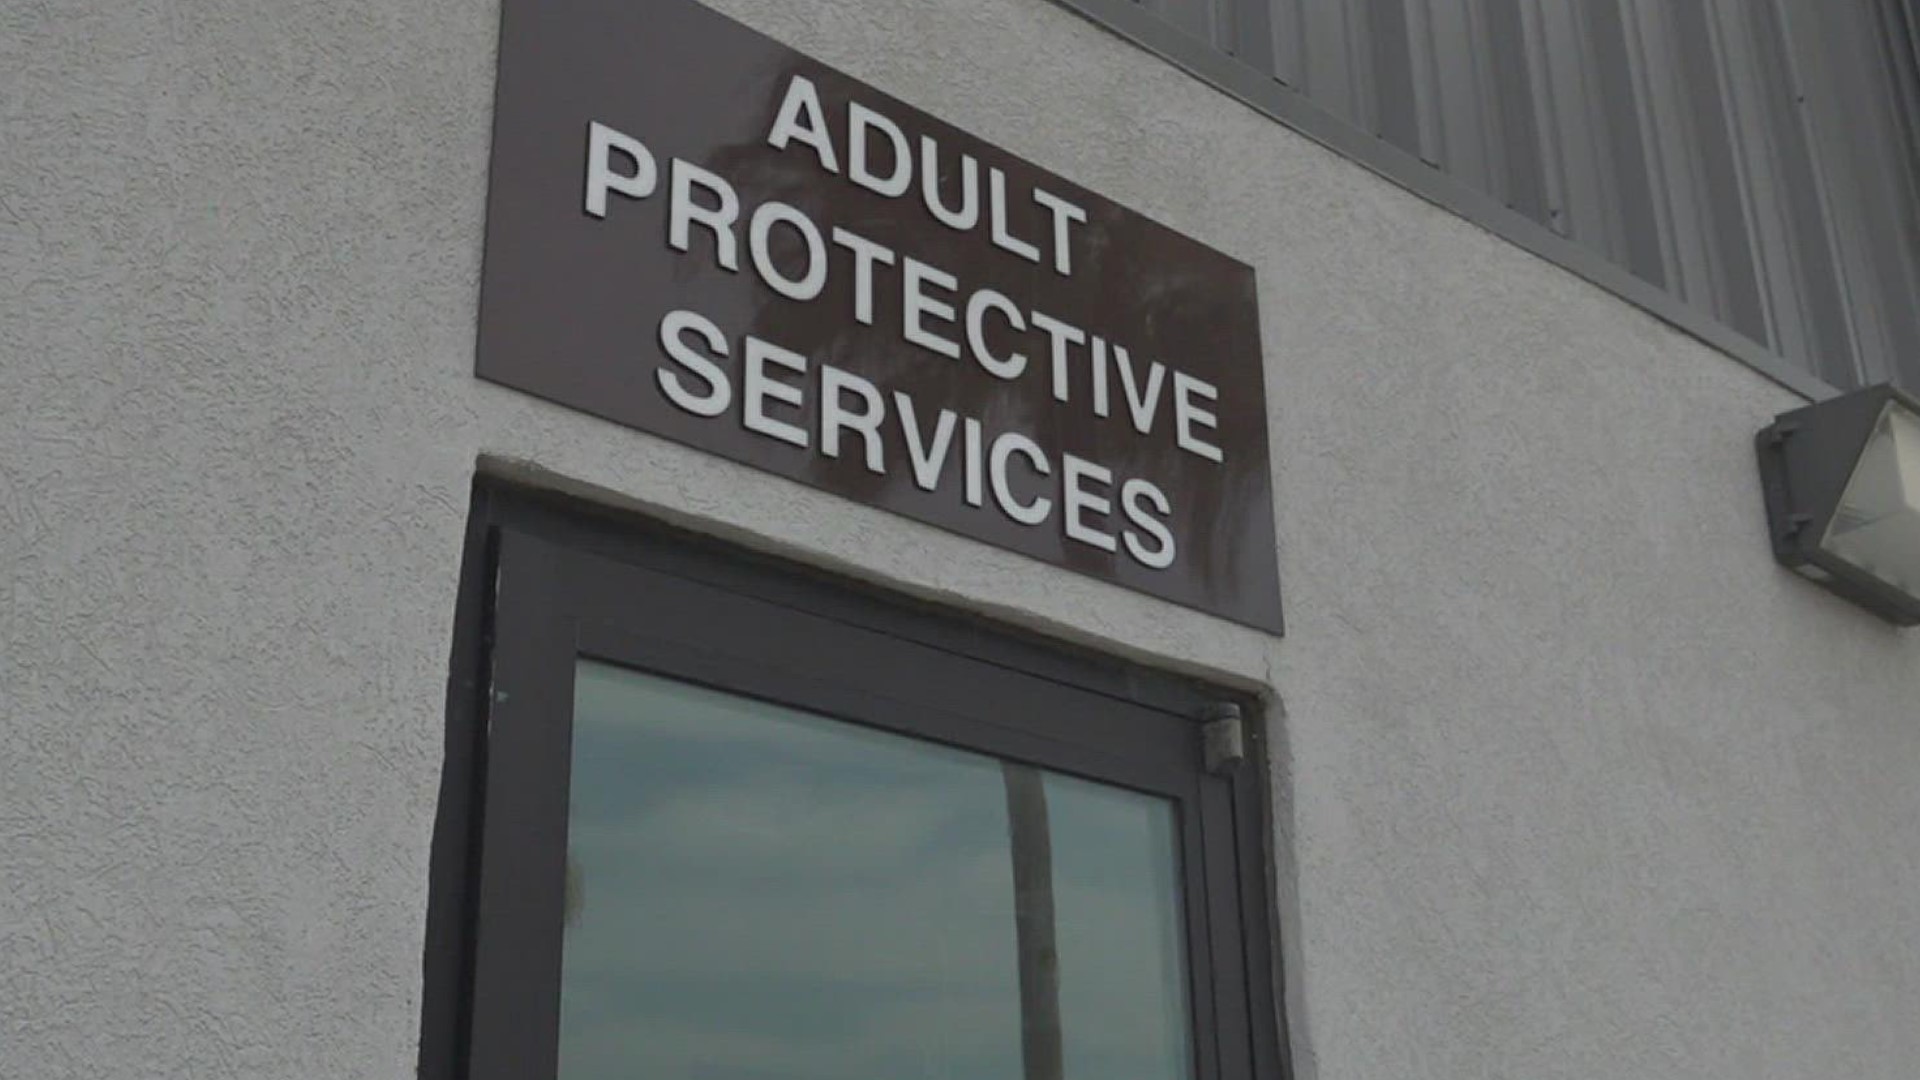 3NEWS spent time with an Adult Protective Services Case Worker for a closer look at one day of services and the details of what they encounter.